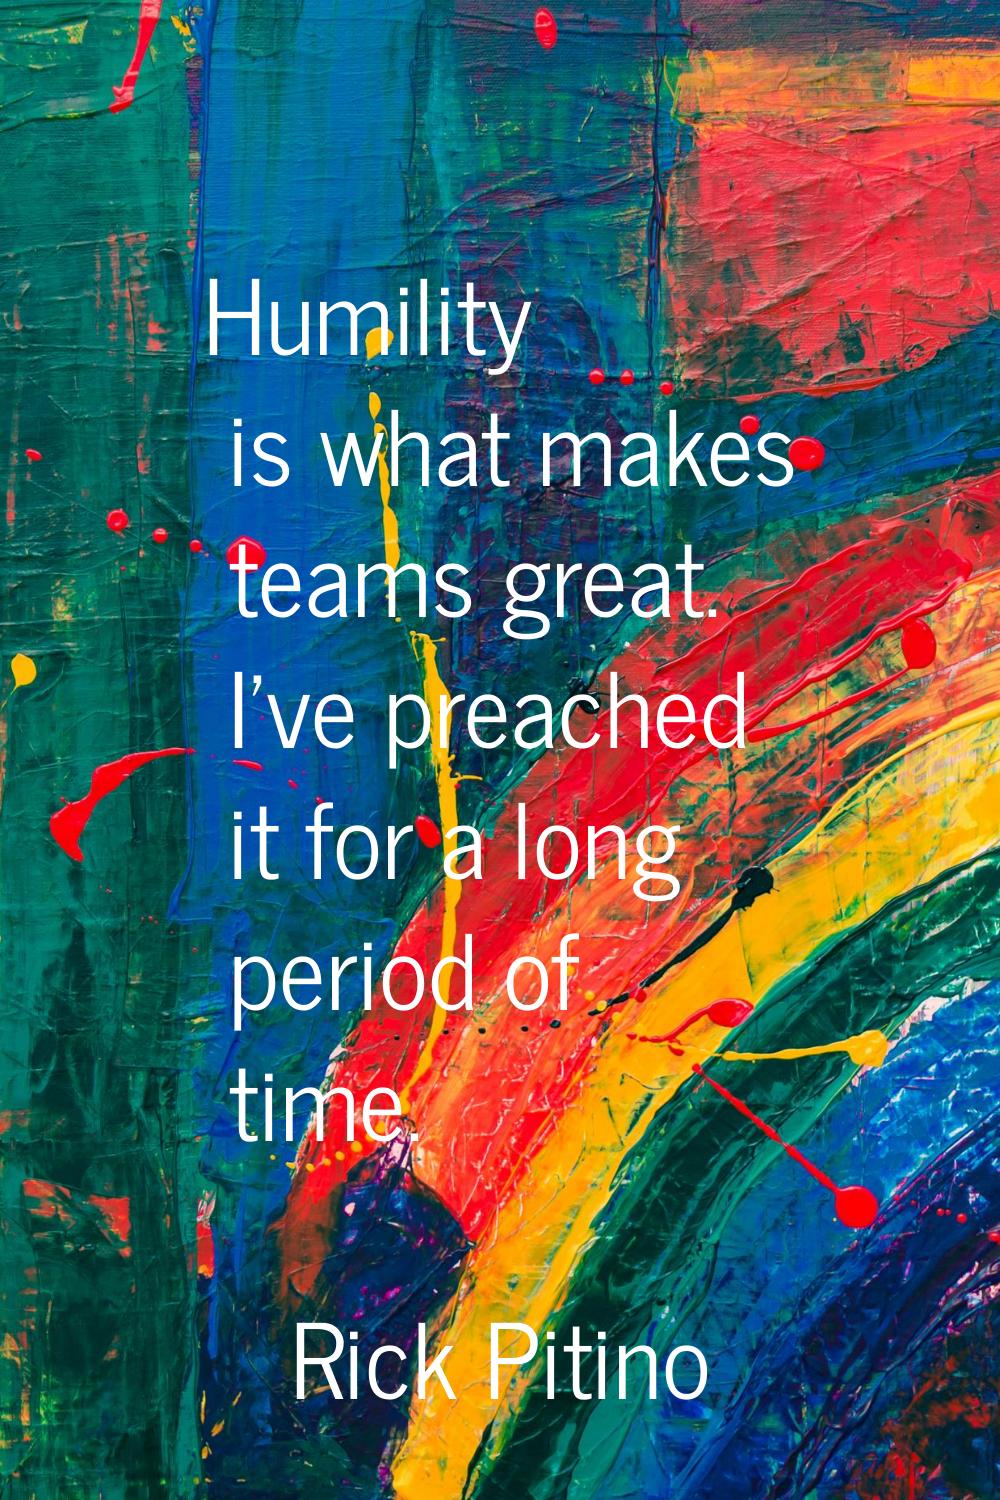 Humility is what makes teams great. I've preached it for a long period of time.